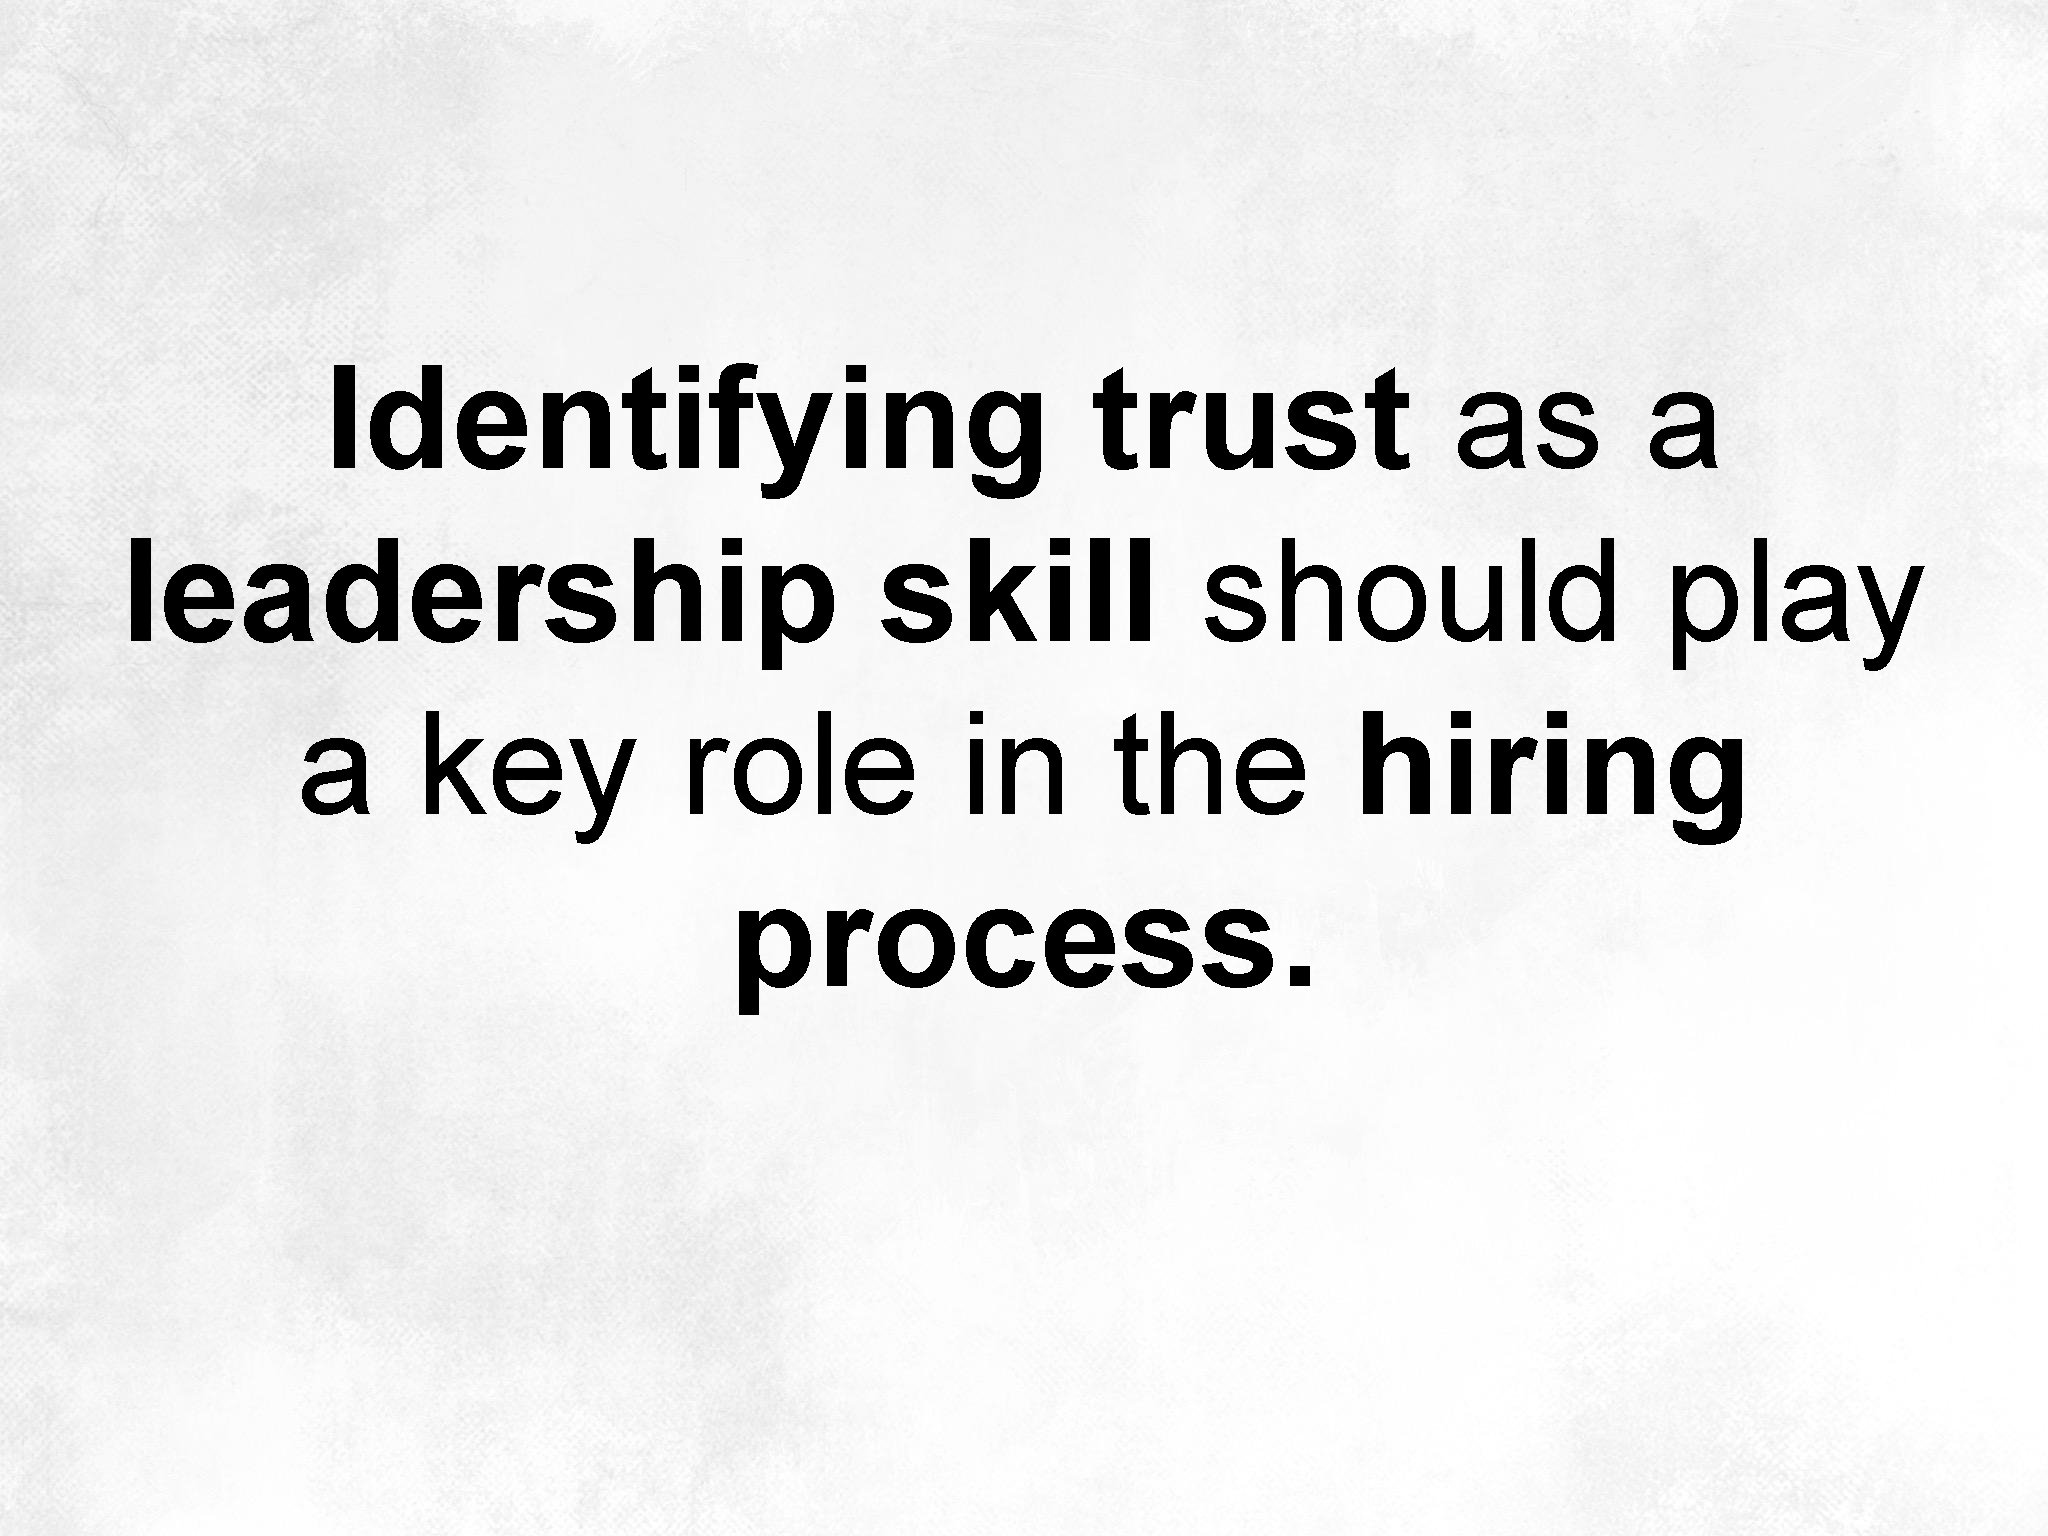 Identifying trust as a leadership skill should play a key role in the hiring